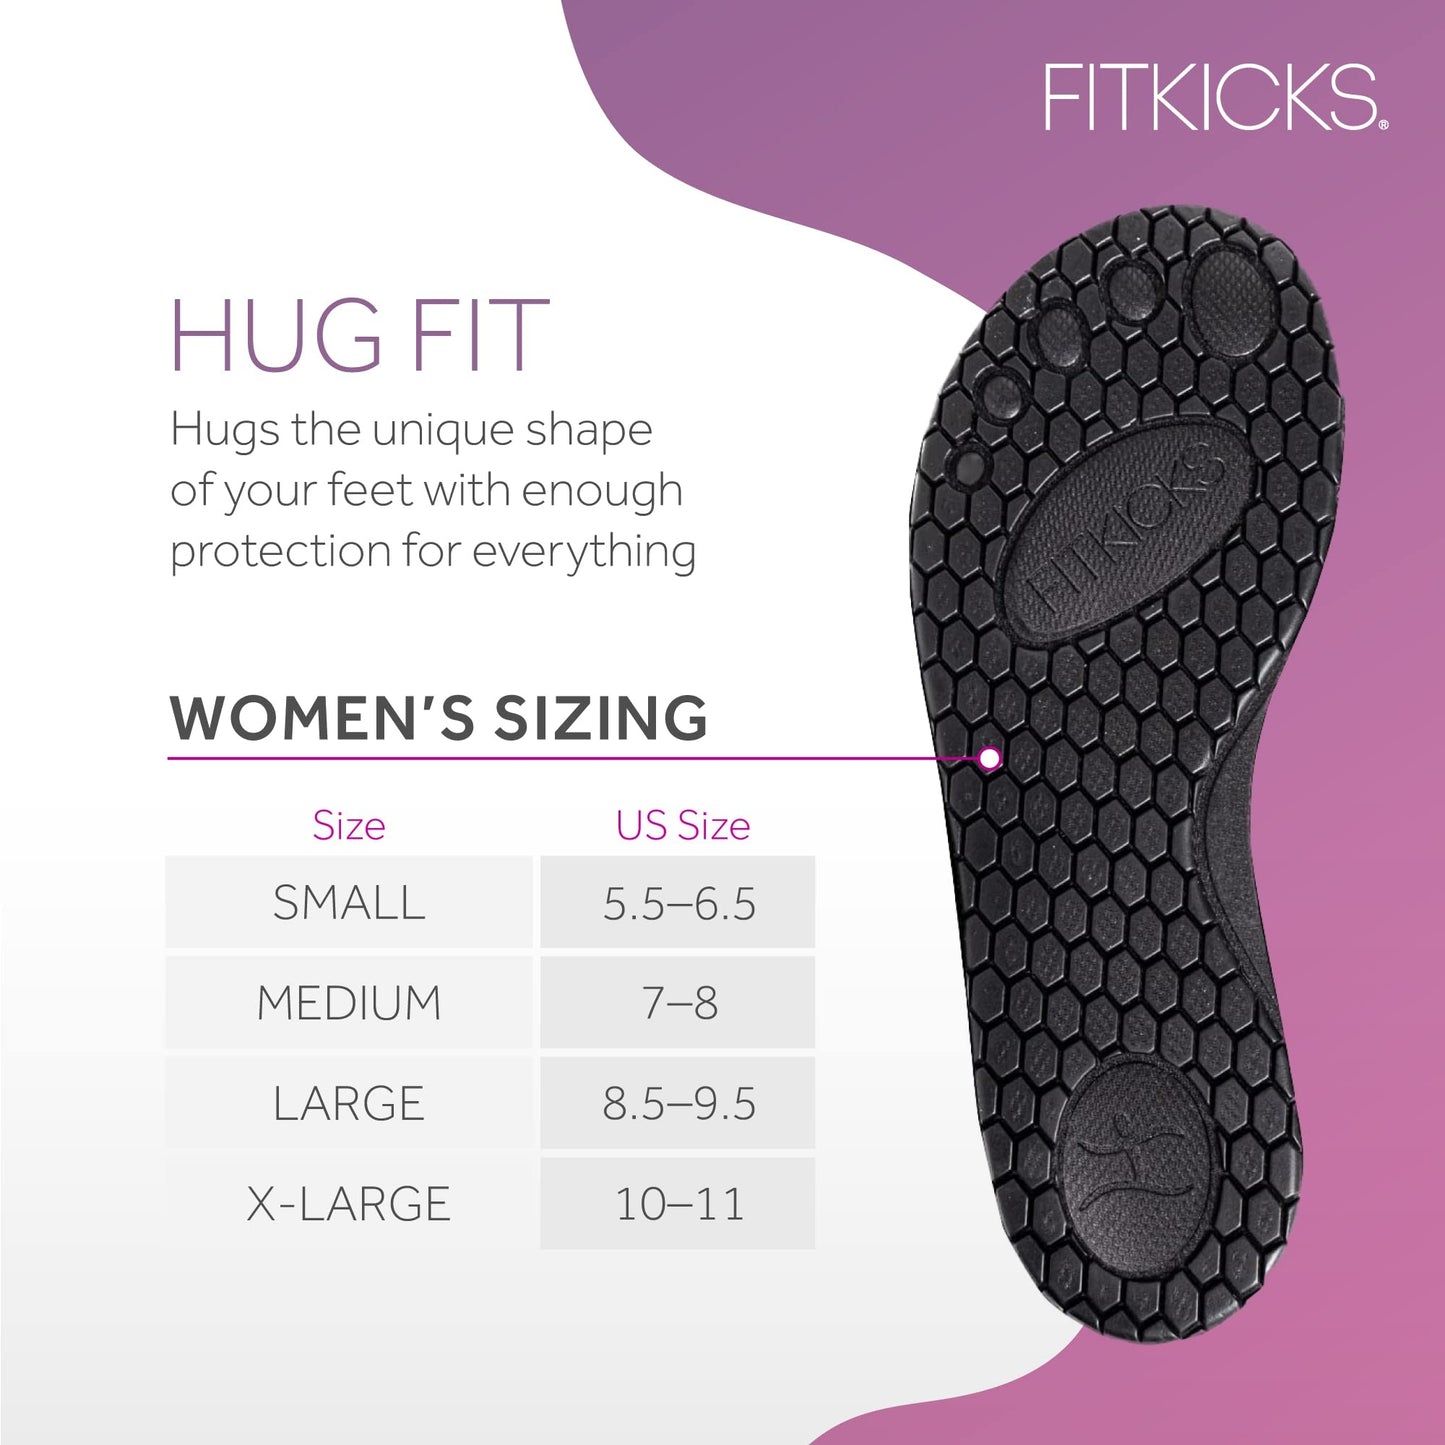 Fitkicks Women Active Footwear, Women's Size Small Black and White Water Shoes